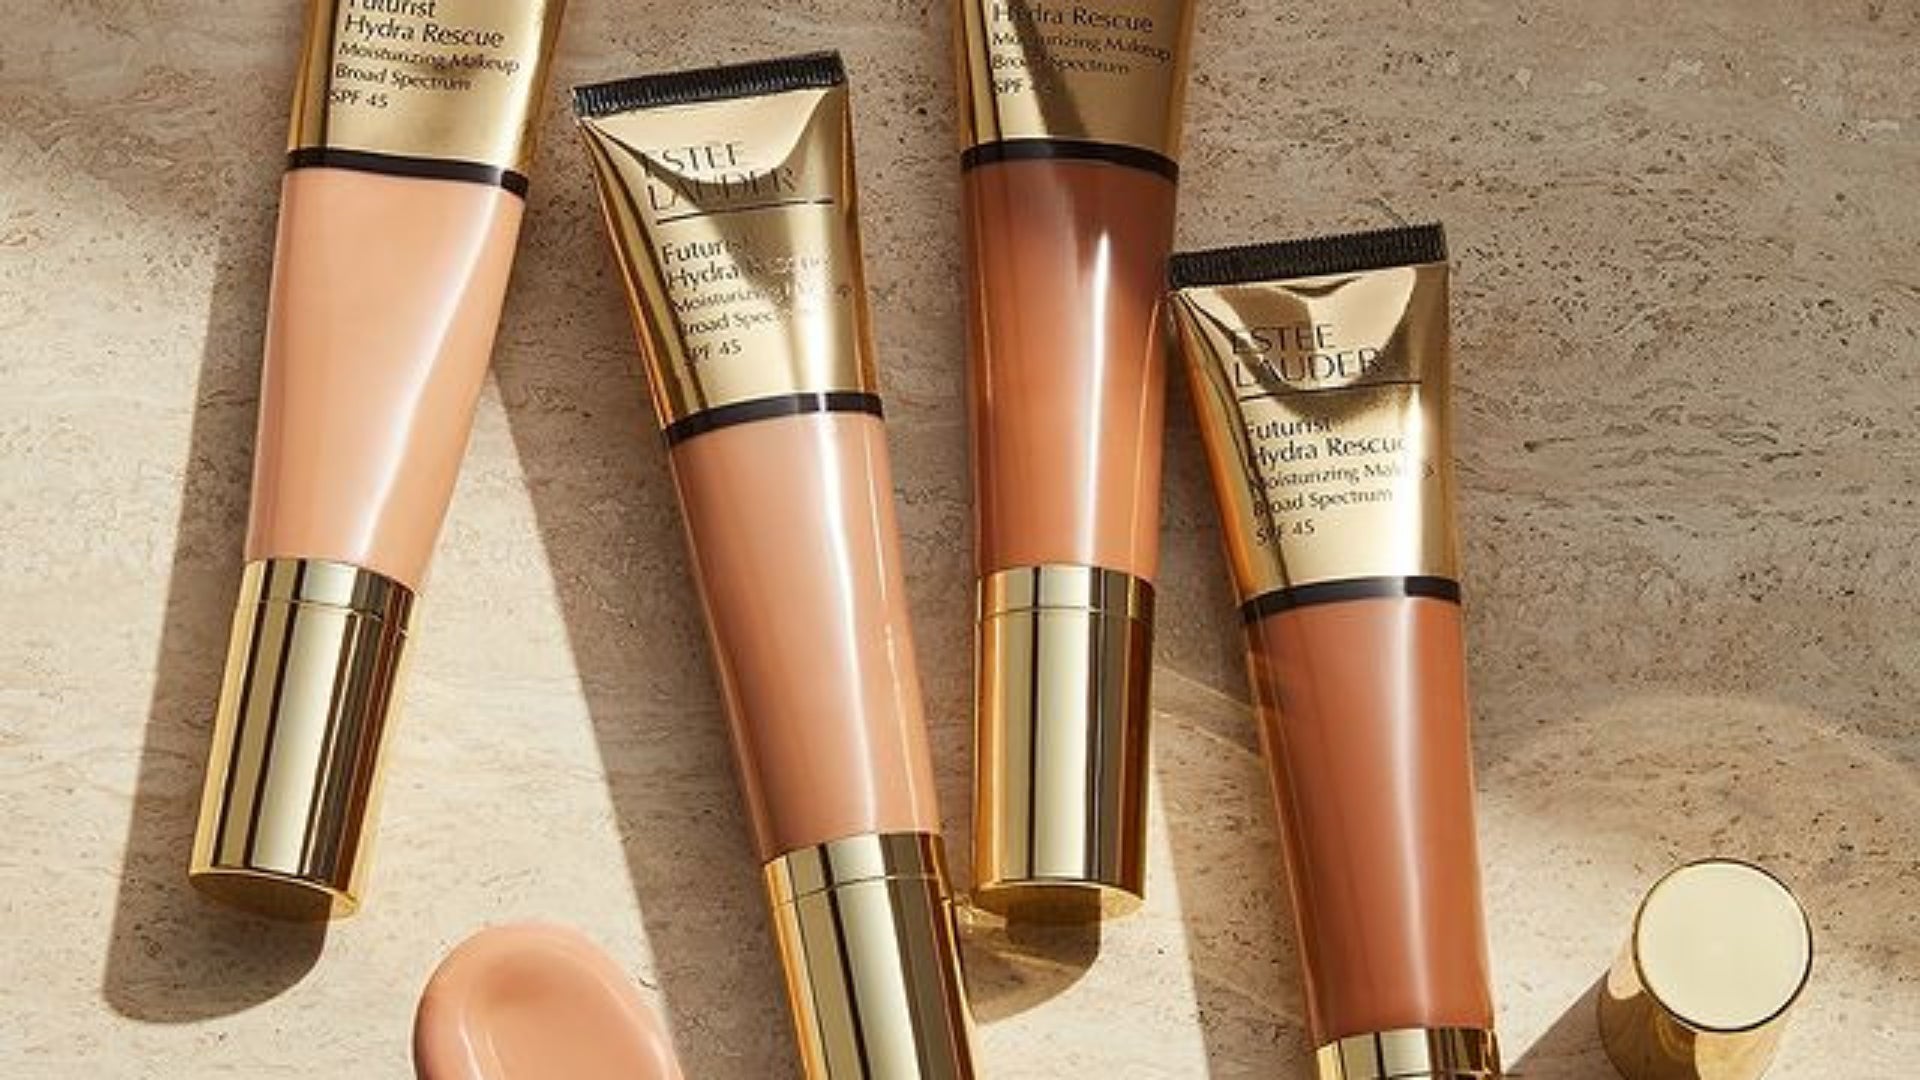 These Estée Lauder Finds Are Worth The Buy, According To Reviews